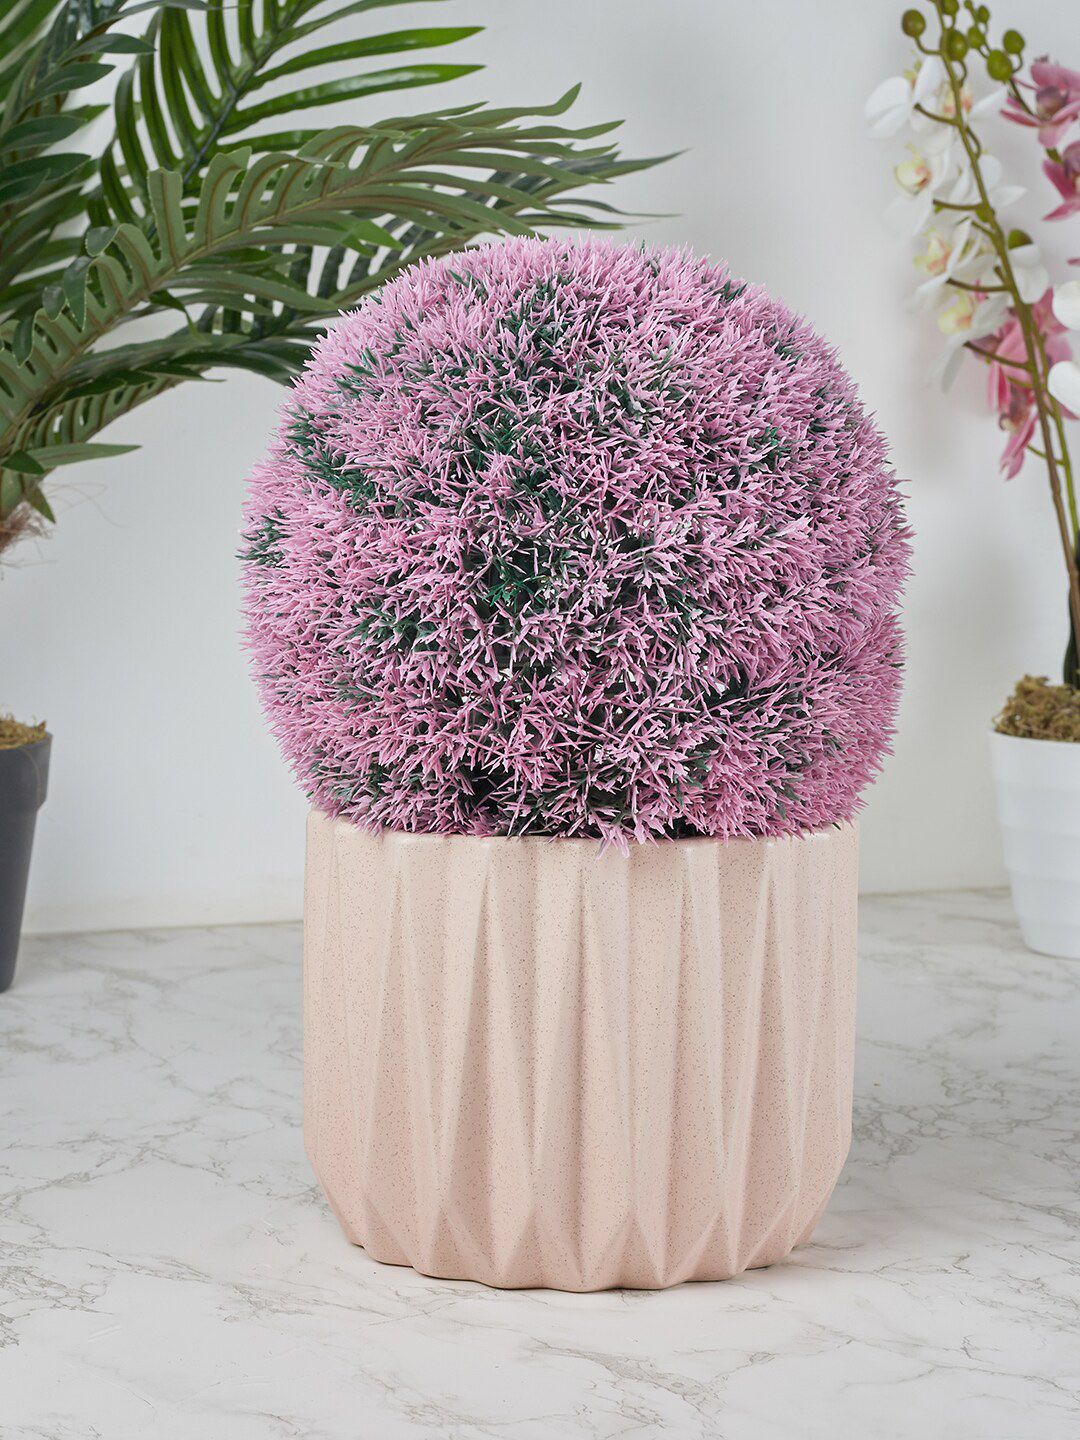 HomeTown Green & Pink Grass Decorative Ball Artificial With Pot Price in India